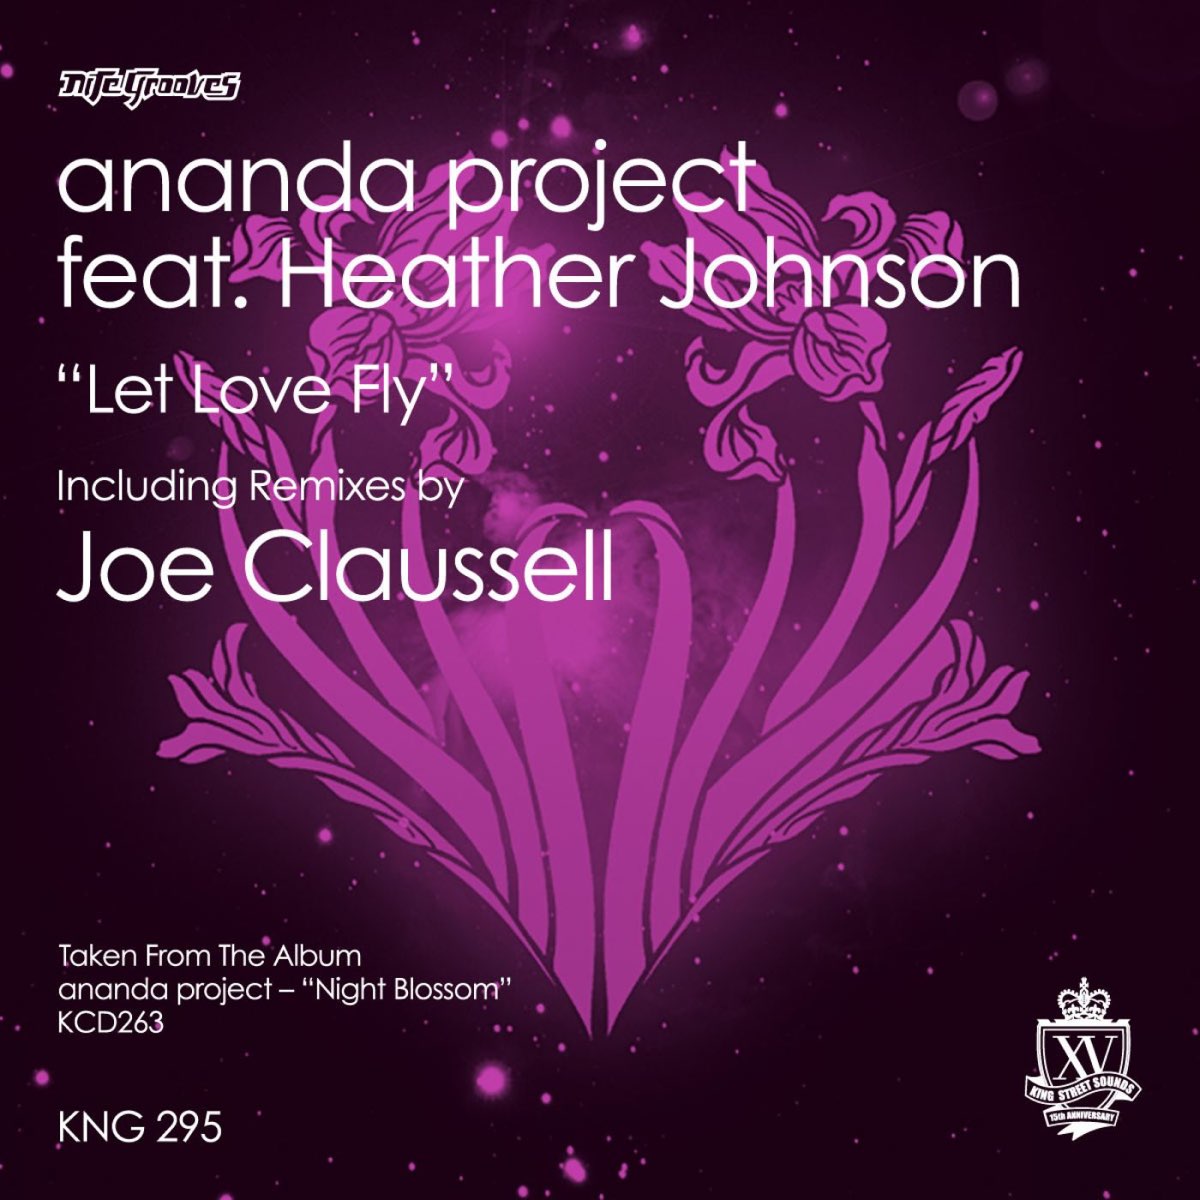 Lets love remix. Ananda Project. Joe Claussell. Ananda Project альбомы. Let's Love.